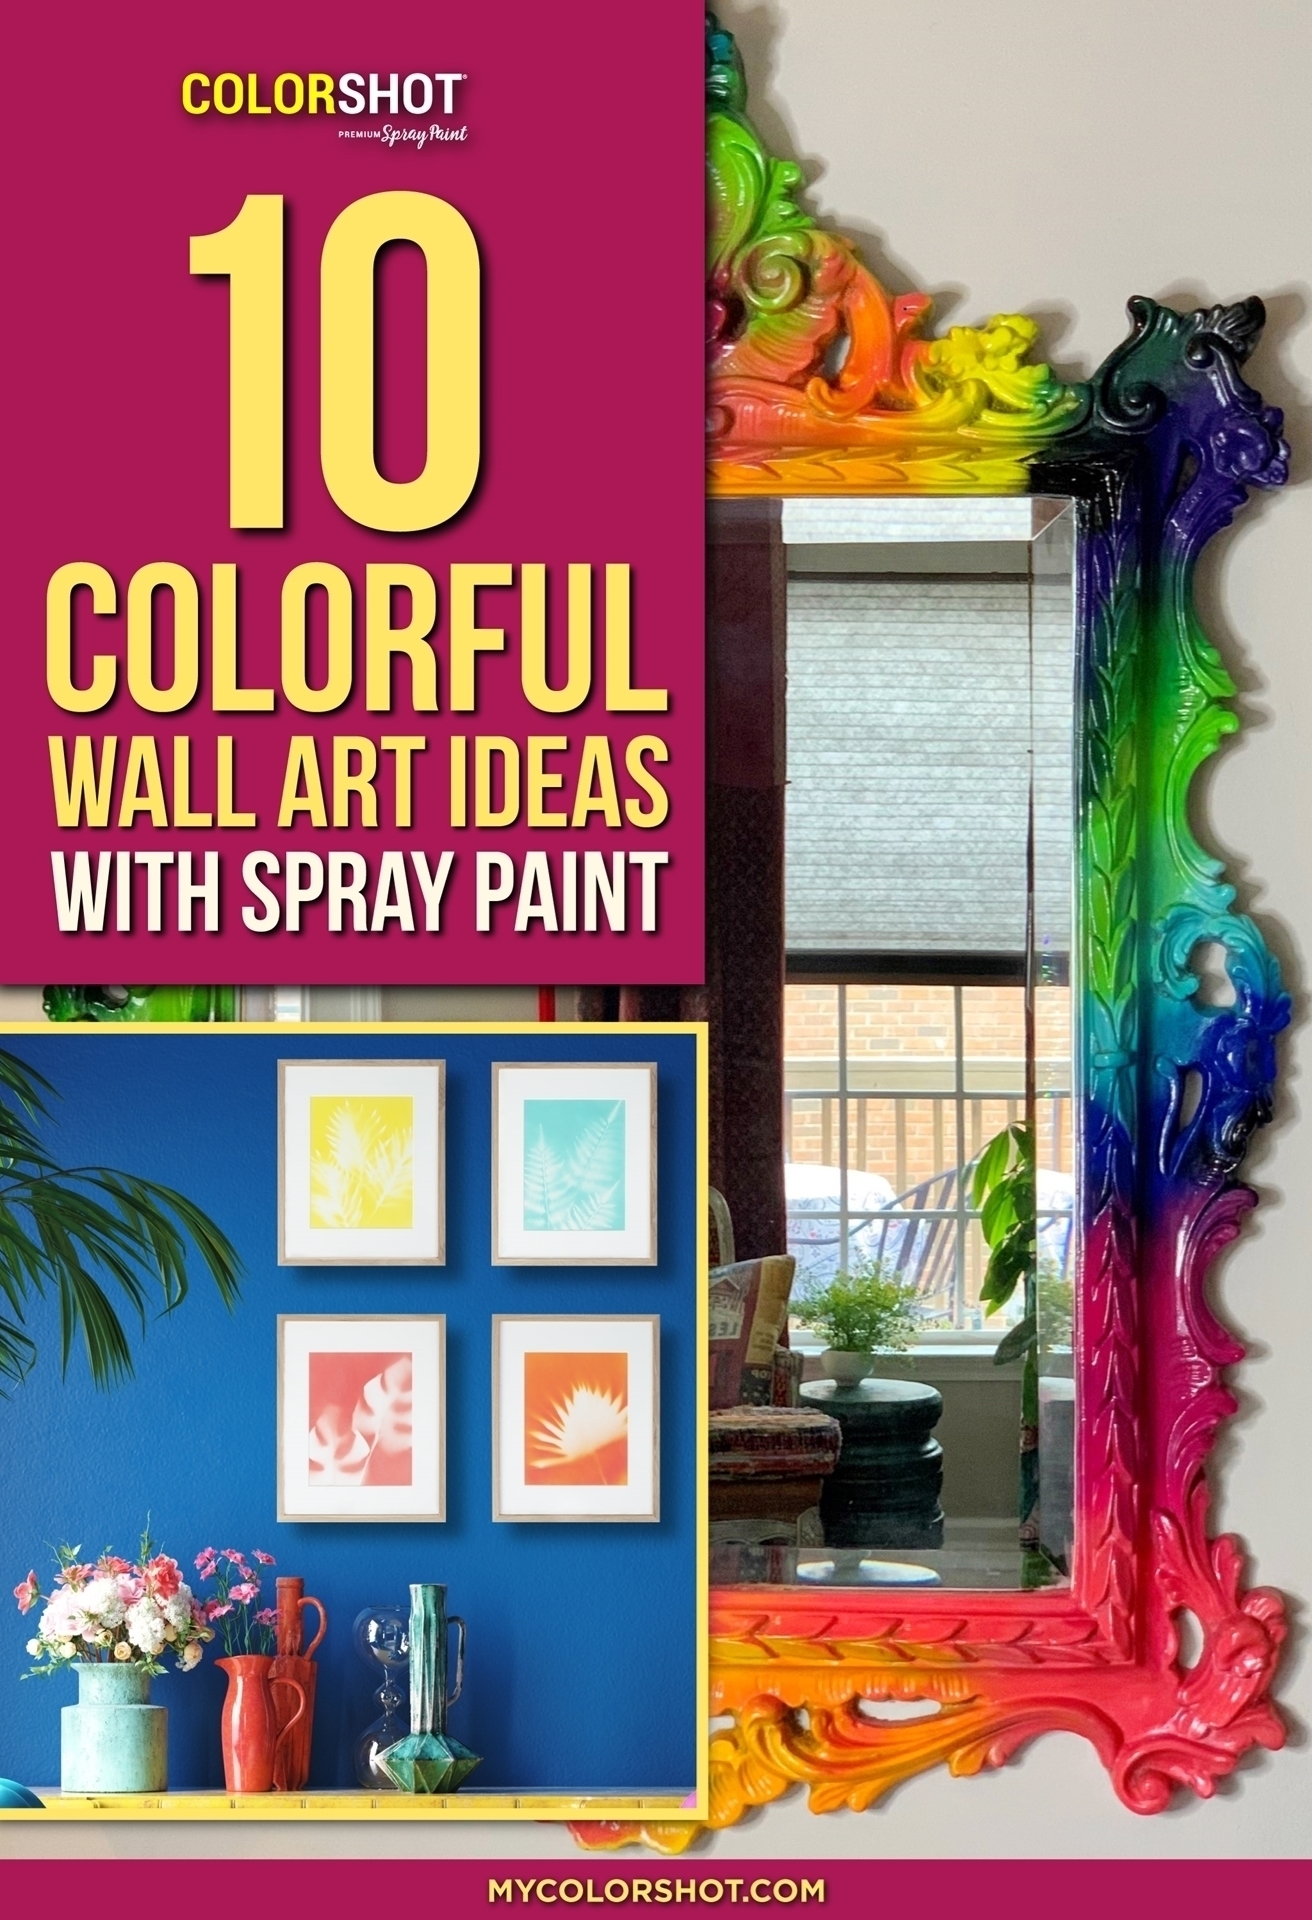 10 Colorful Wall Art Ideas with Spray Paint